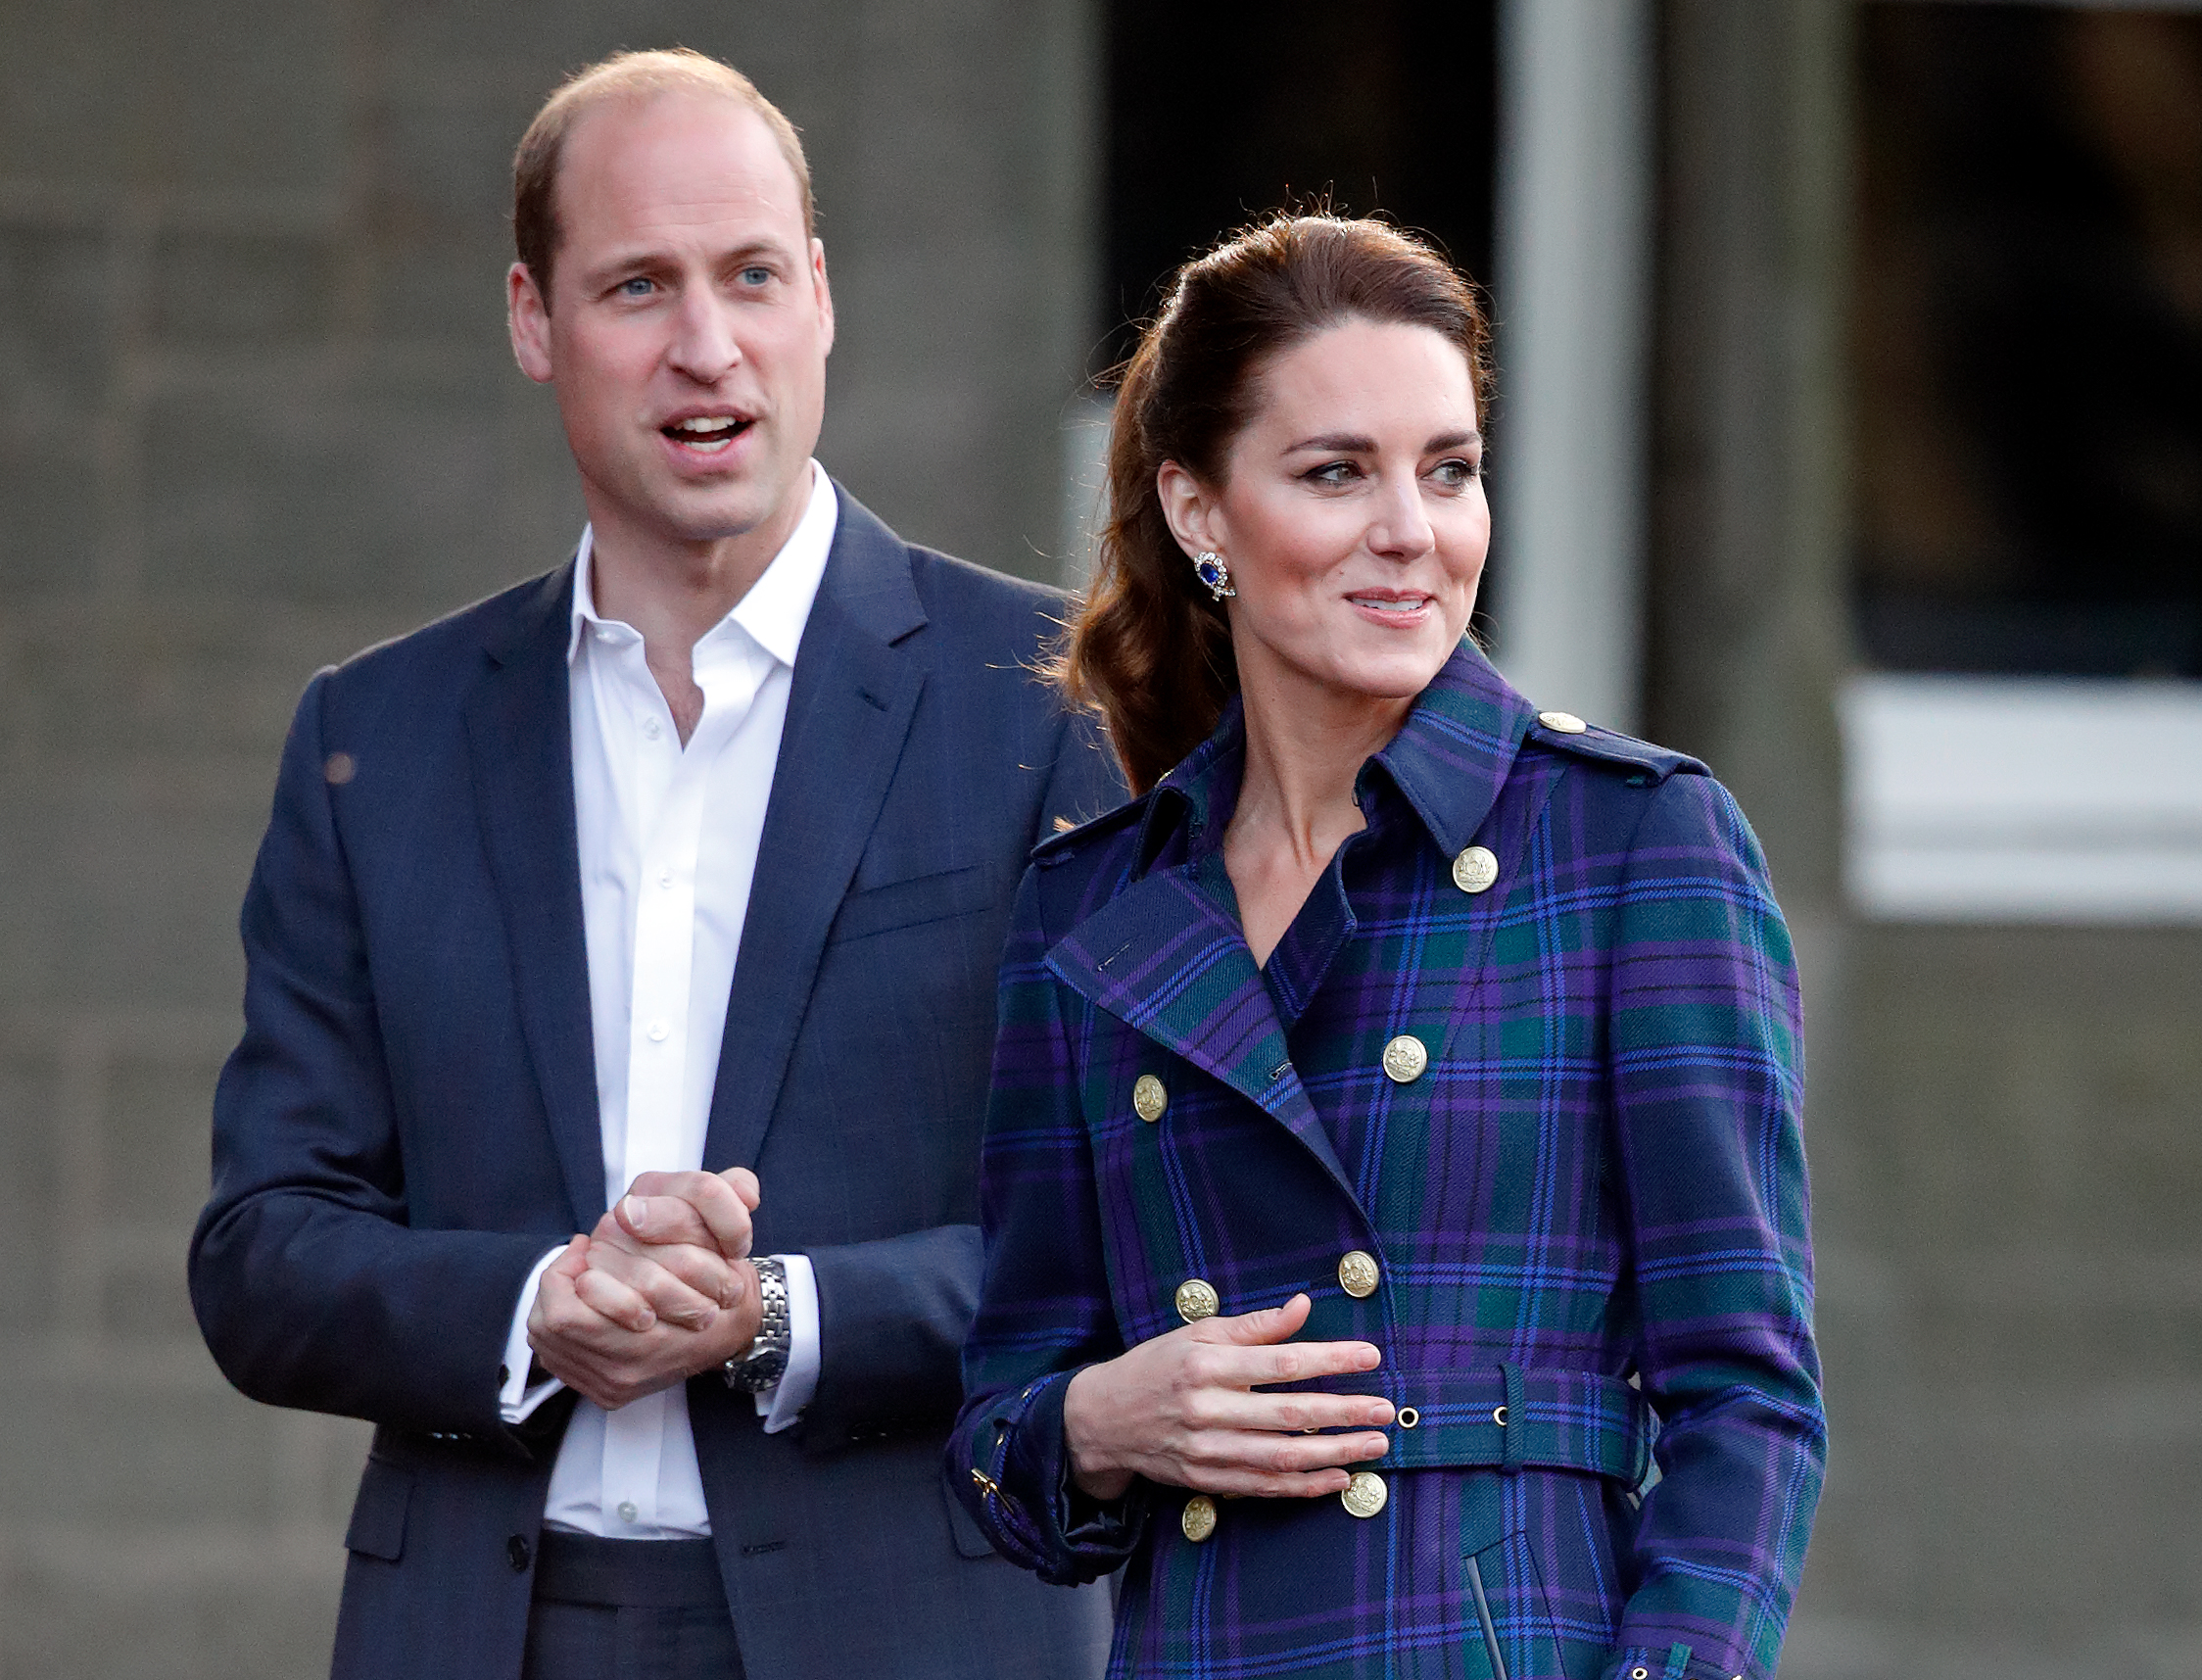 <p><a href="https://www.wonderwall.com/celebrity/profiles/overview/prince-william-482.article">Prince William</a> and <a href="https://www.wonderwall.com/celebrity/profiles/overview/duchess-kate-1356.article">Duchess Kate</a> hosted a drive-in cinema screening of Disney's "Cruella" for Scottish NHS workers at the Palace of Holyroodhouse in Edinburgh, Scotland, on May 26, 2021, during a week-long visit. While in Scotland, the couple are known as the Earl and Countess of Strathearn.</p>